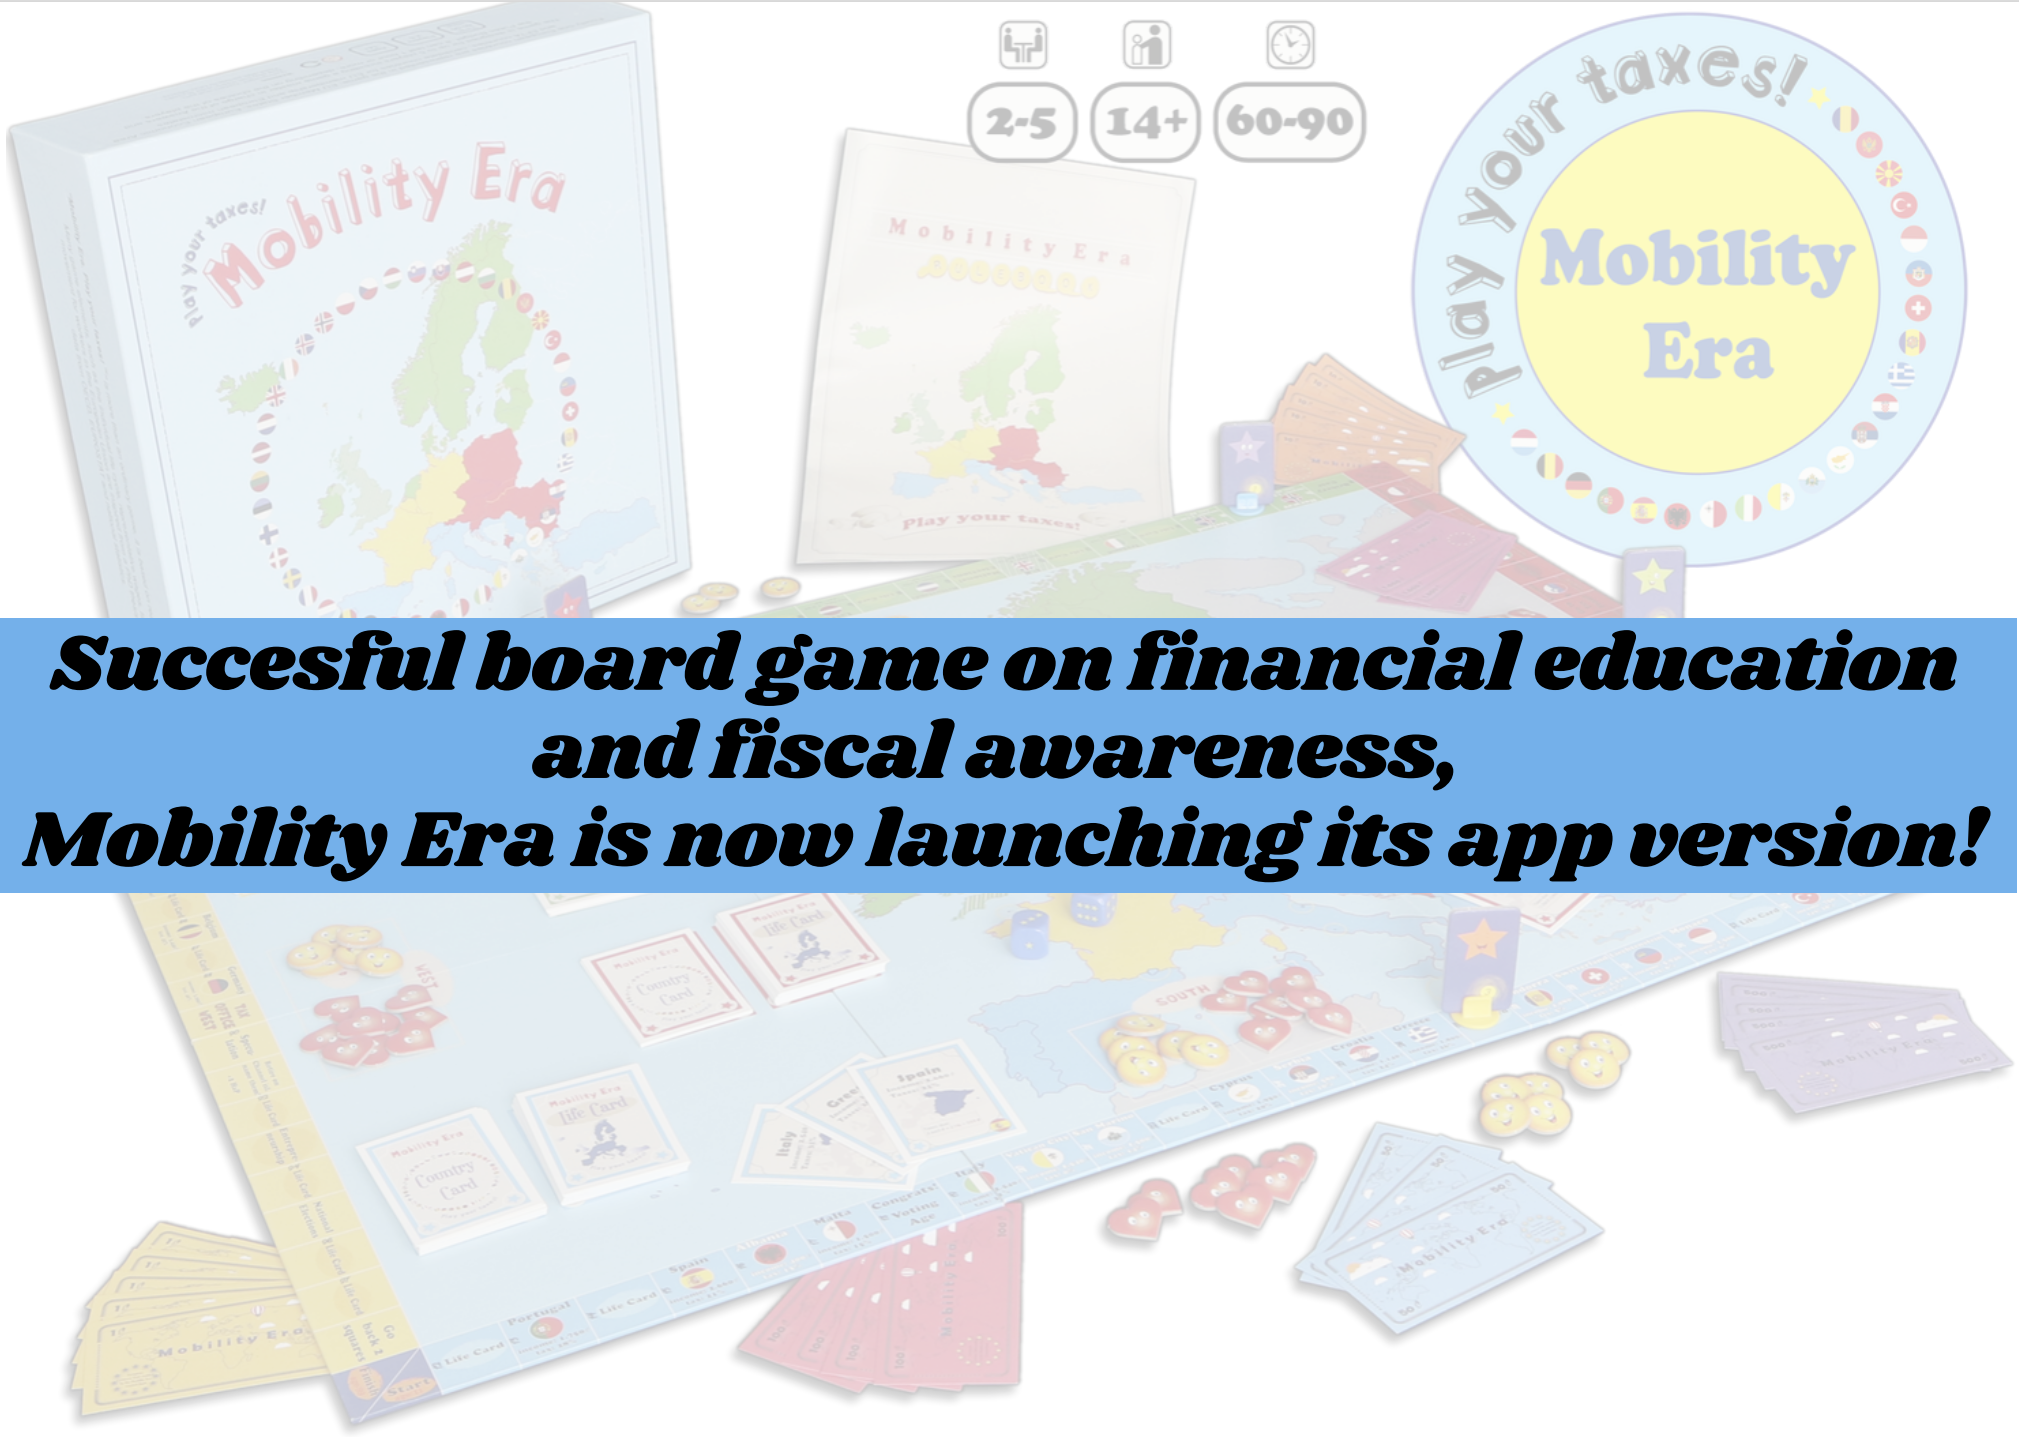 Mobility Era. Play your taxes! #1 board game on taxes.